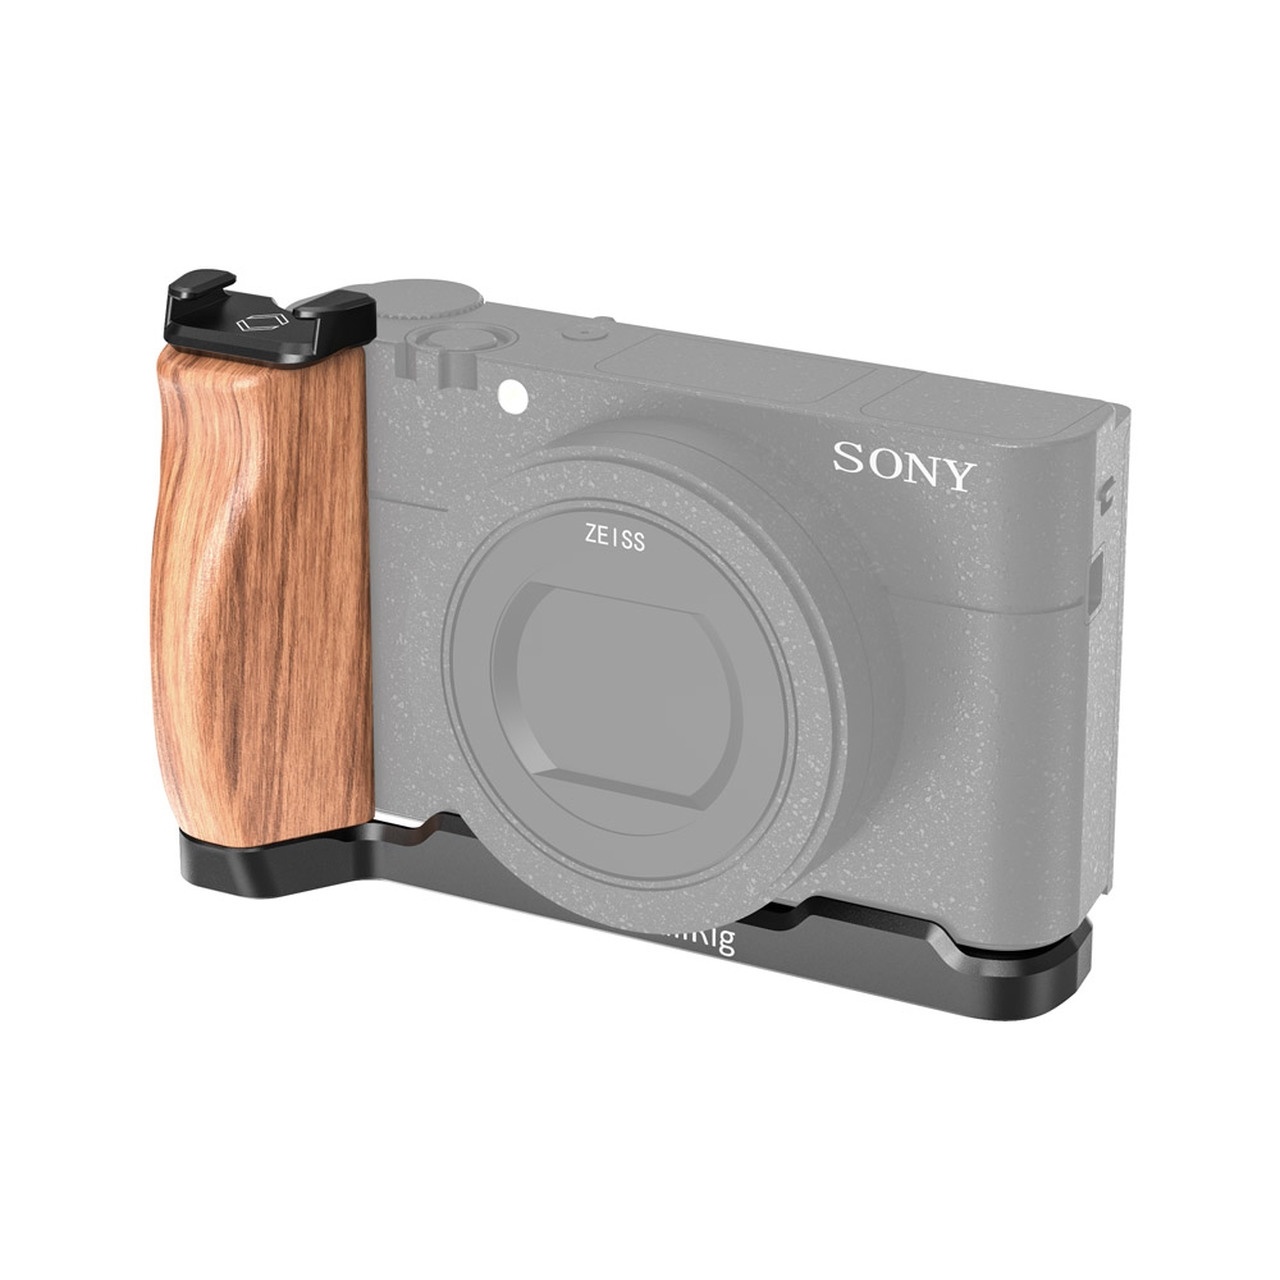 SmallRig L-Shaped Wooden Grip with Cold Shoe for Sony RX100 III/IV/V(VA)/VI/VII